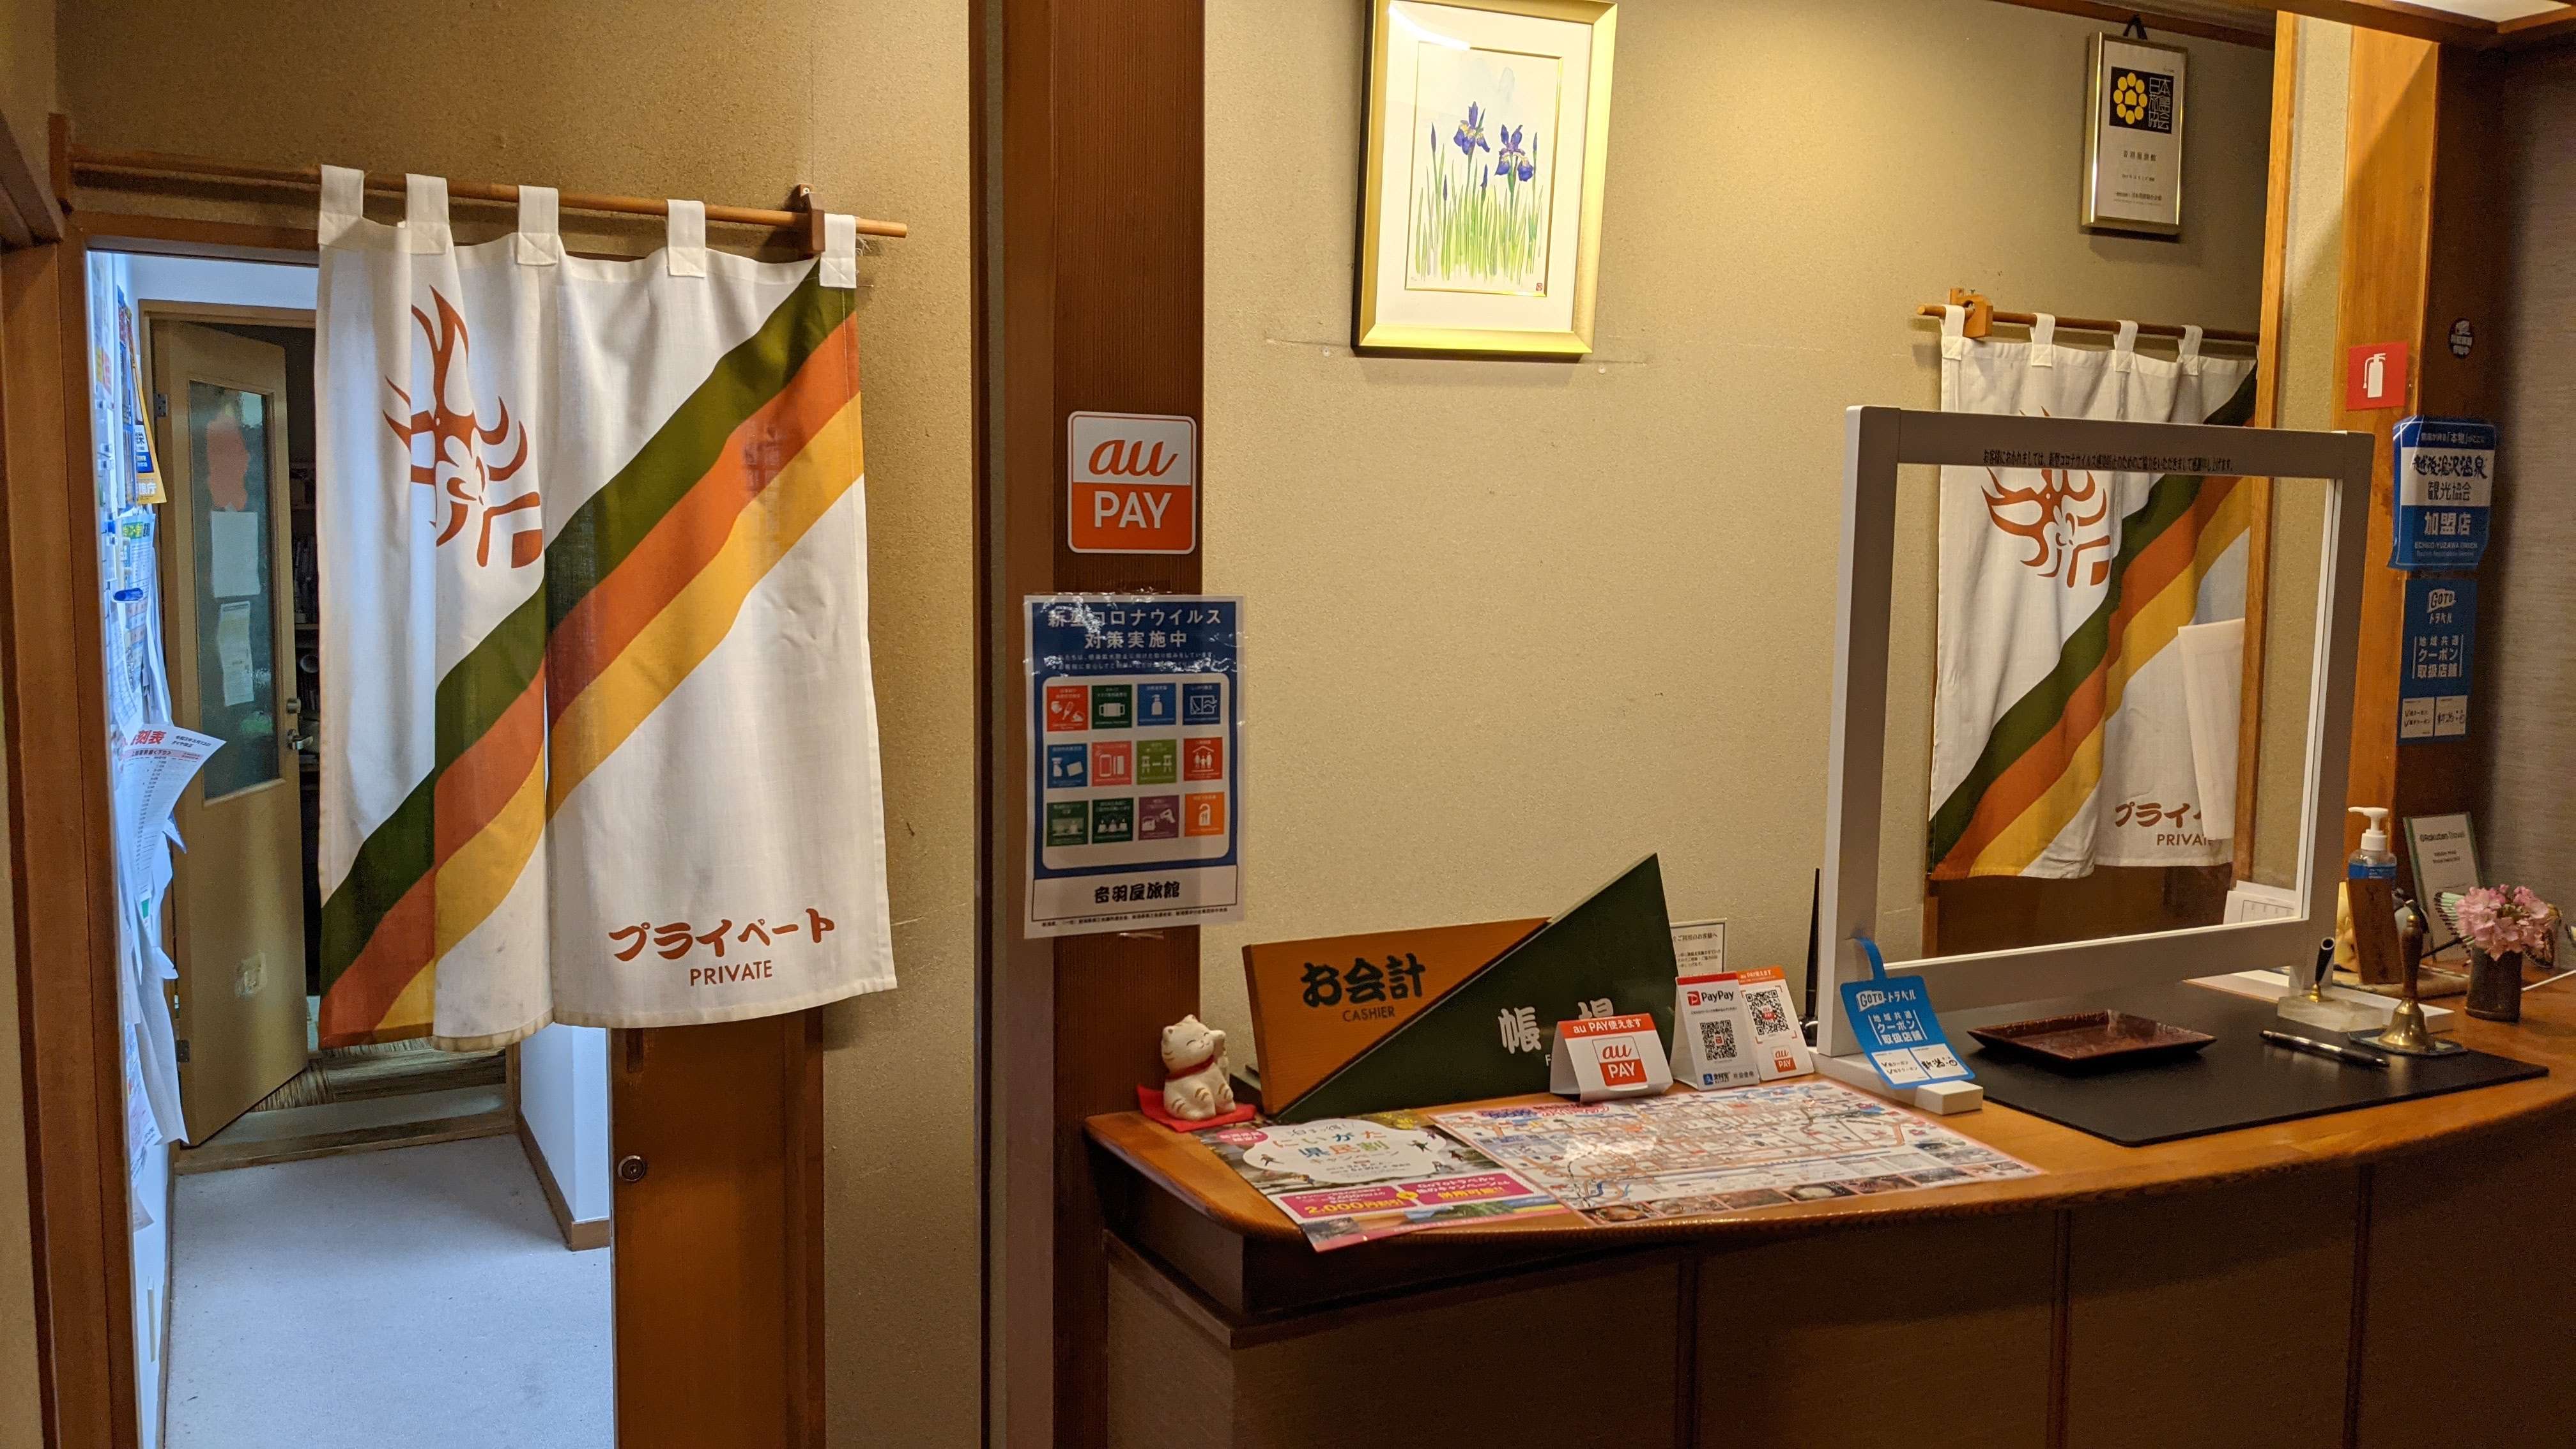 Find the PayPay QR code at this hotel reception in Yuzawa!